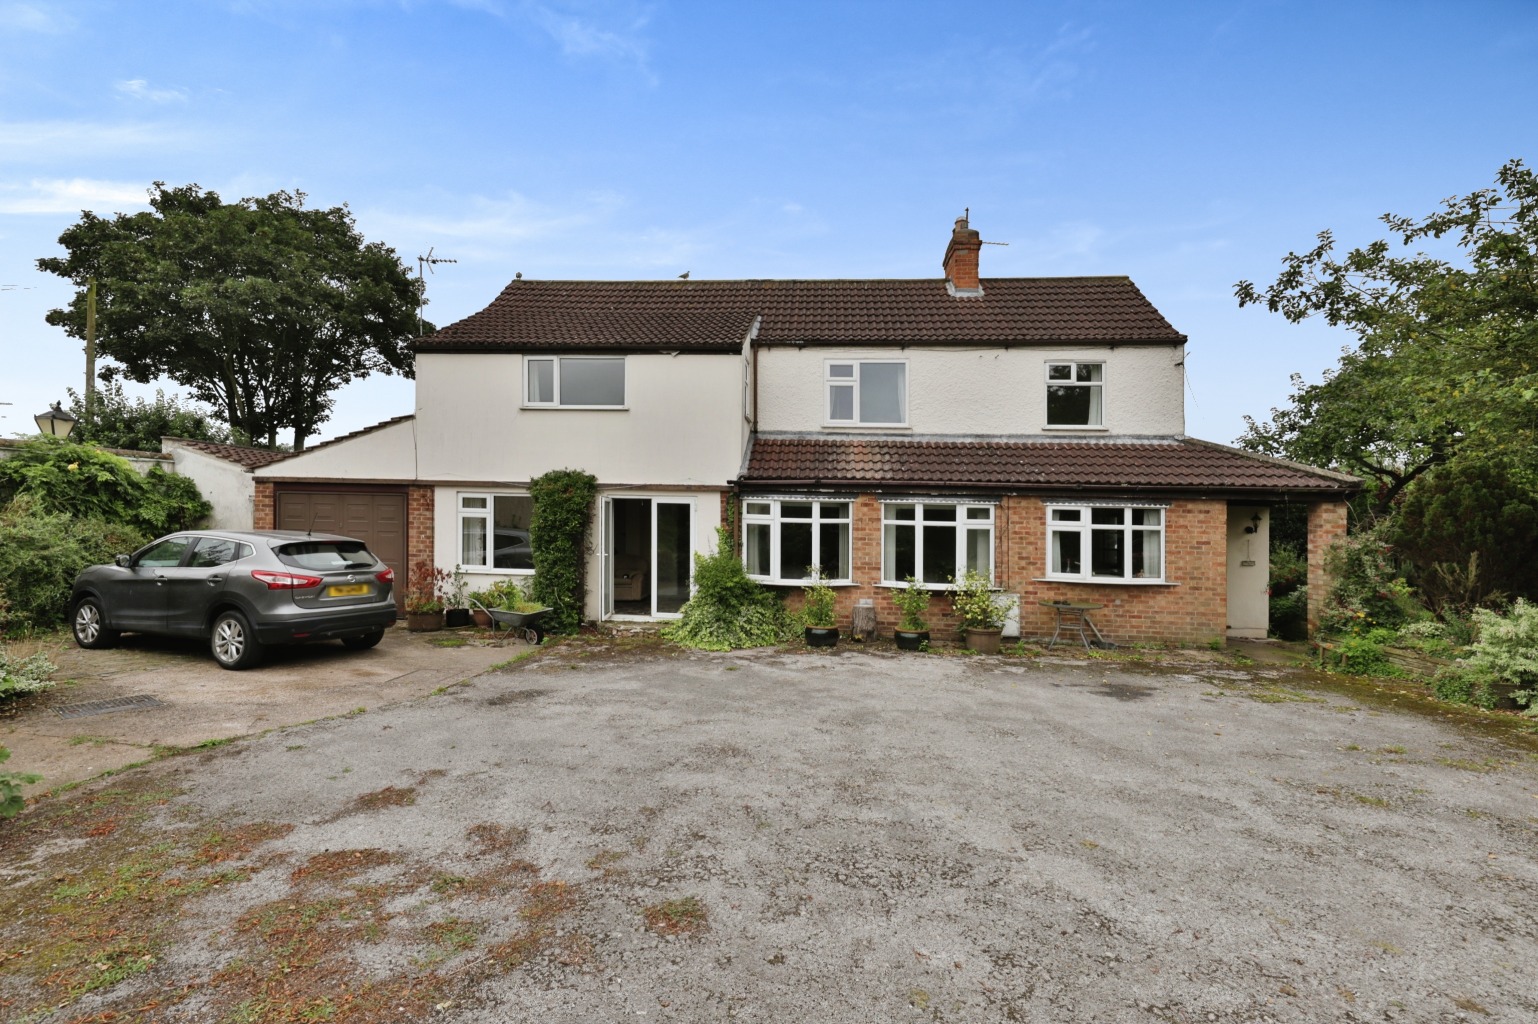 4 bed detached house for sale in High Stile, Beverley - Property Image 1